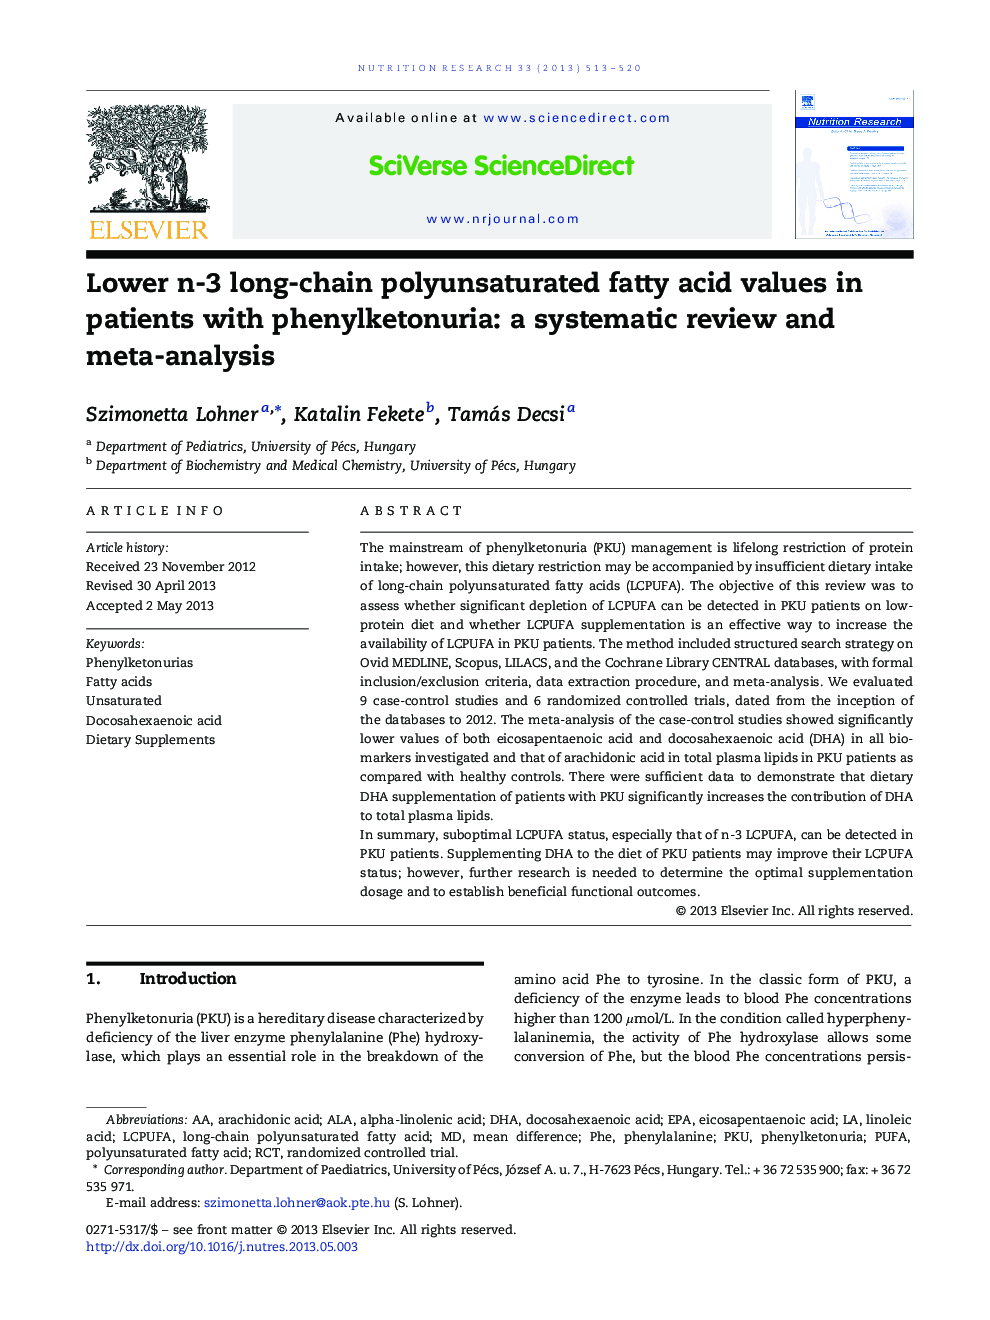 Lower n-3 long-chain polyunsaturated fatty acid values in patients with phenylketonuria: a systematic review and meta-analysis